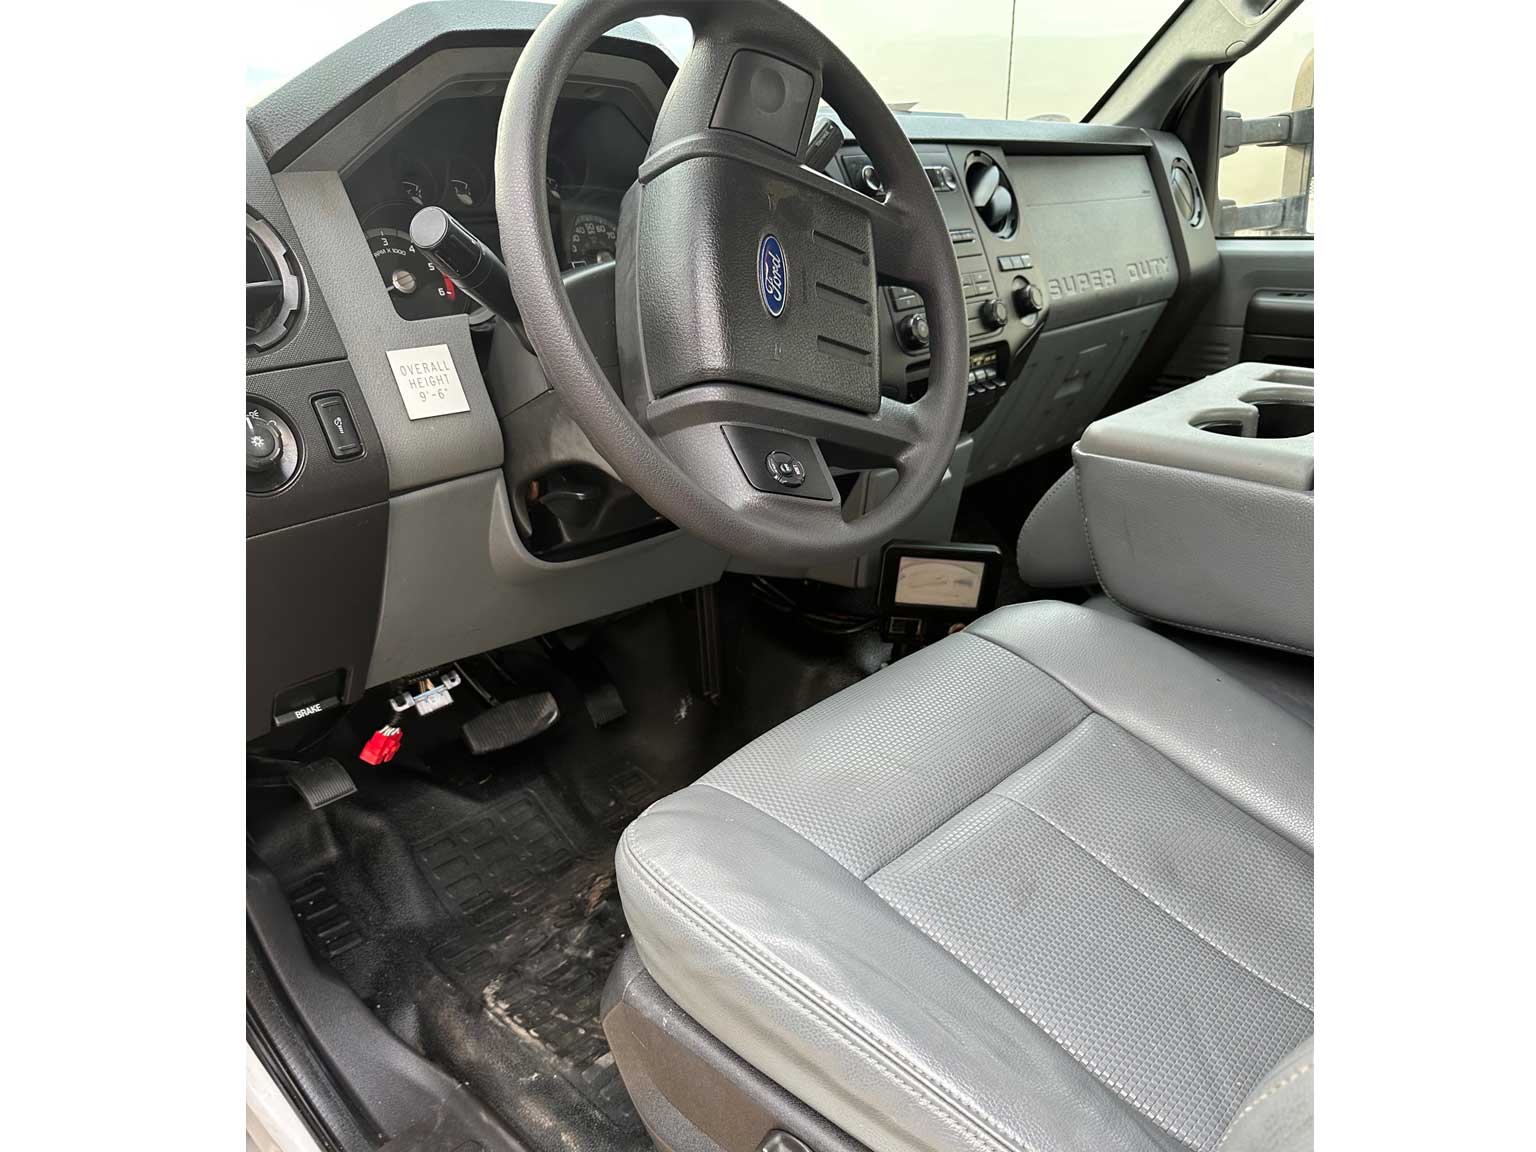 The interior of a ford super duty truck